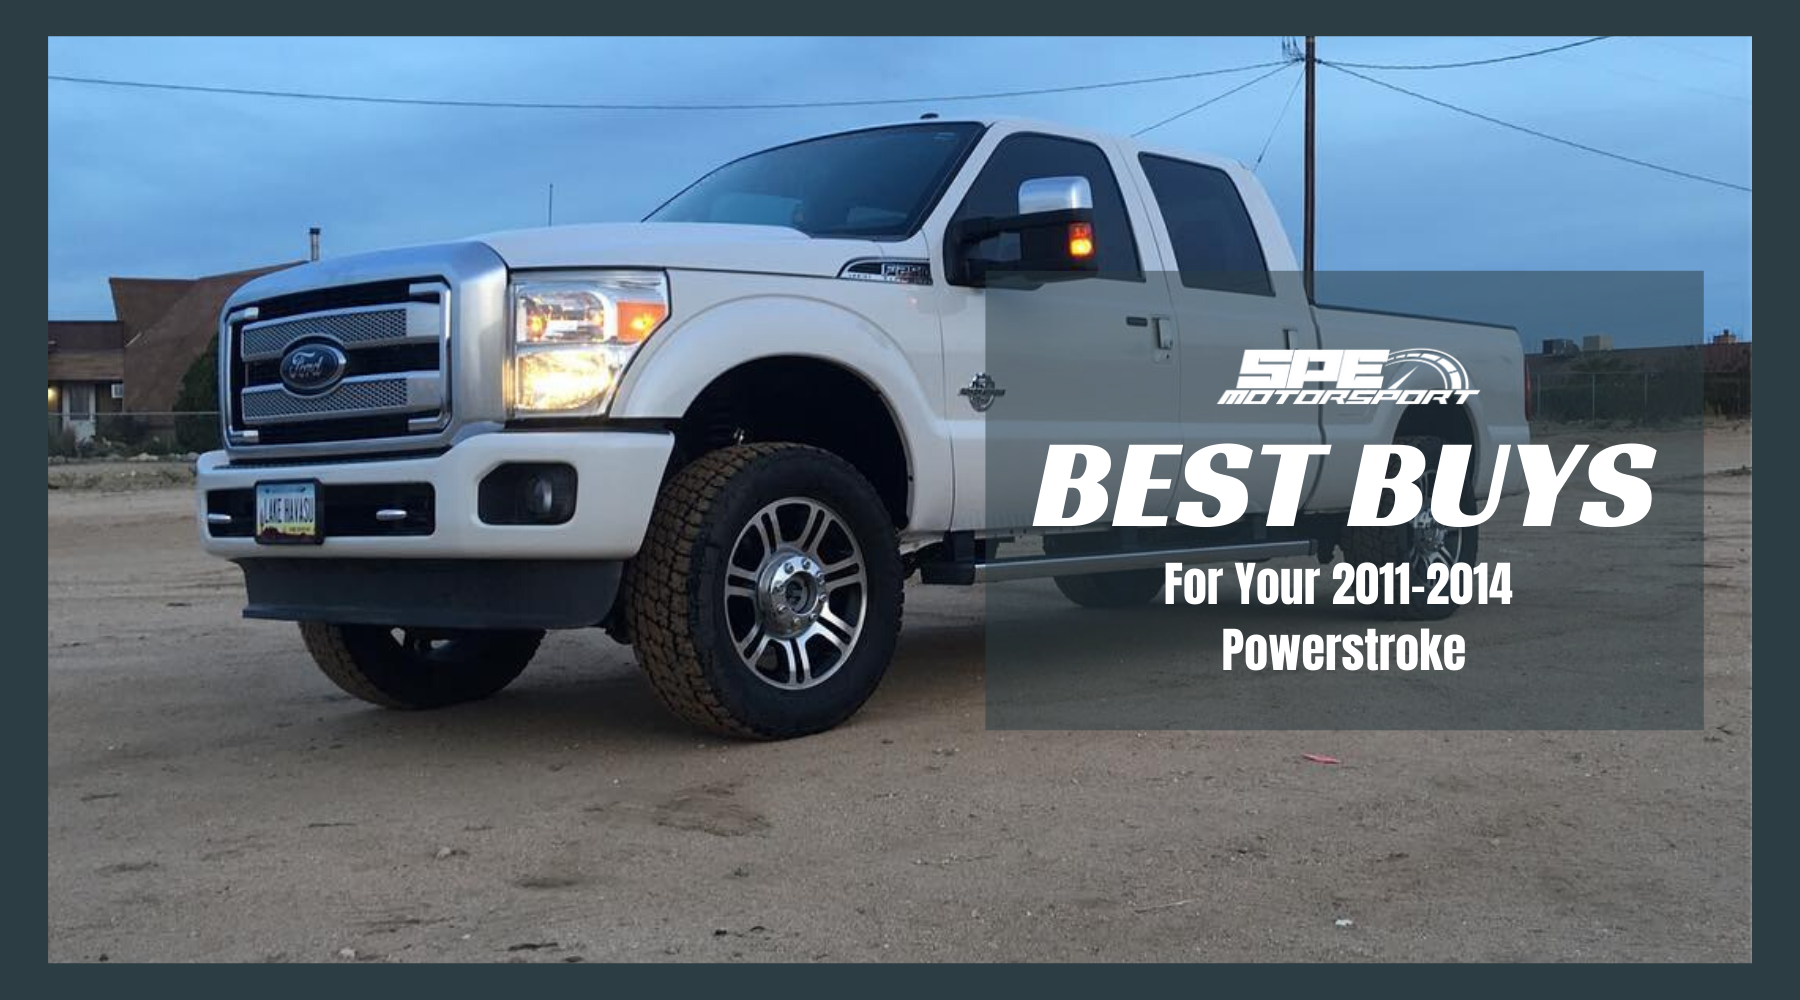 The Best Buys for Your 2011-2014 Powerstroke